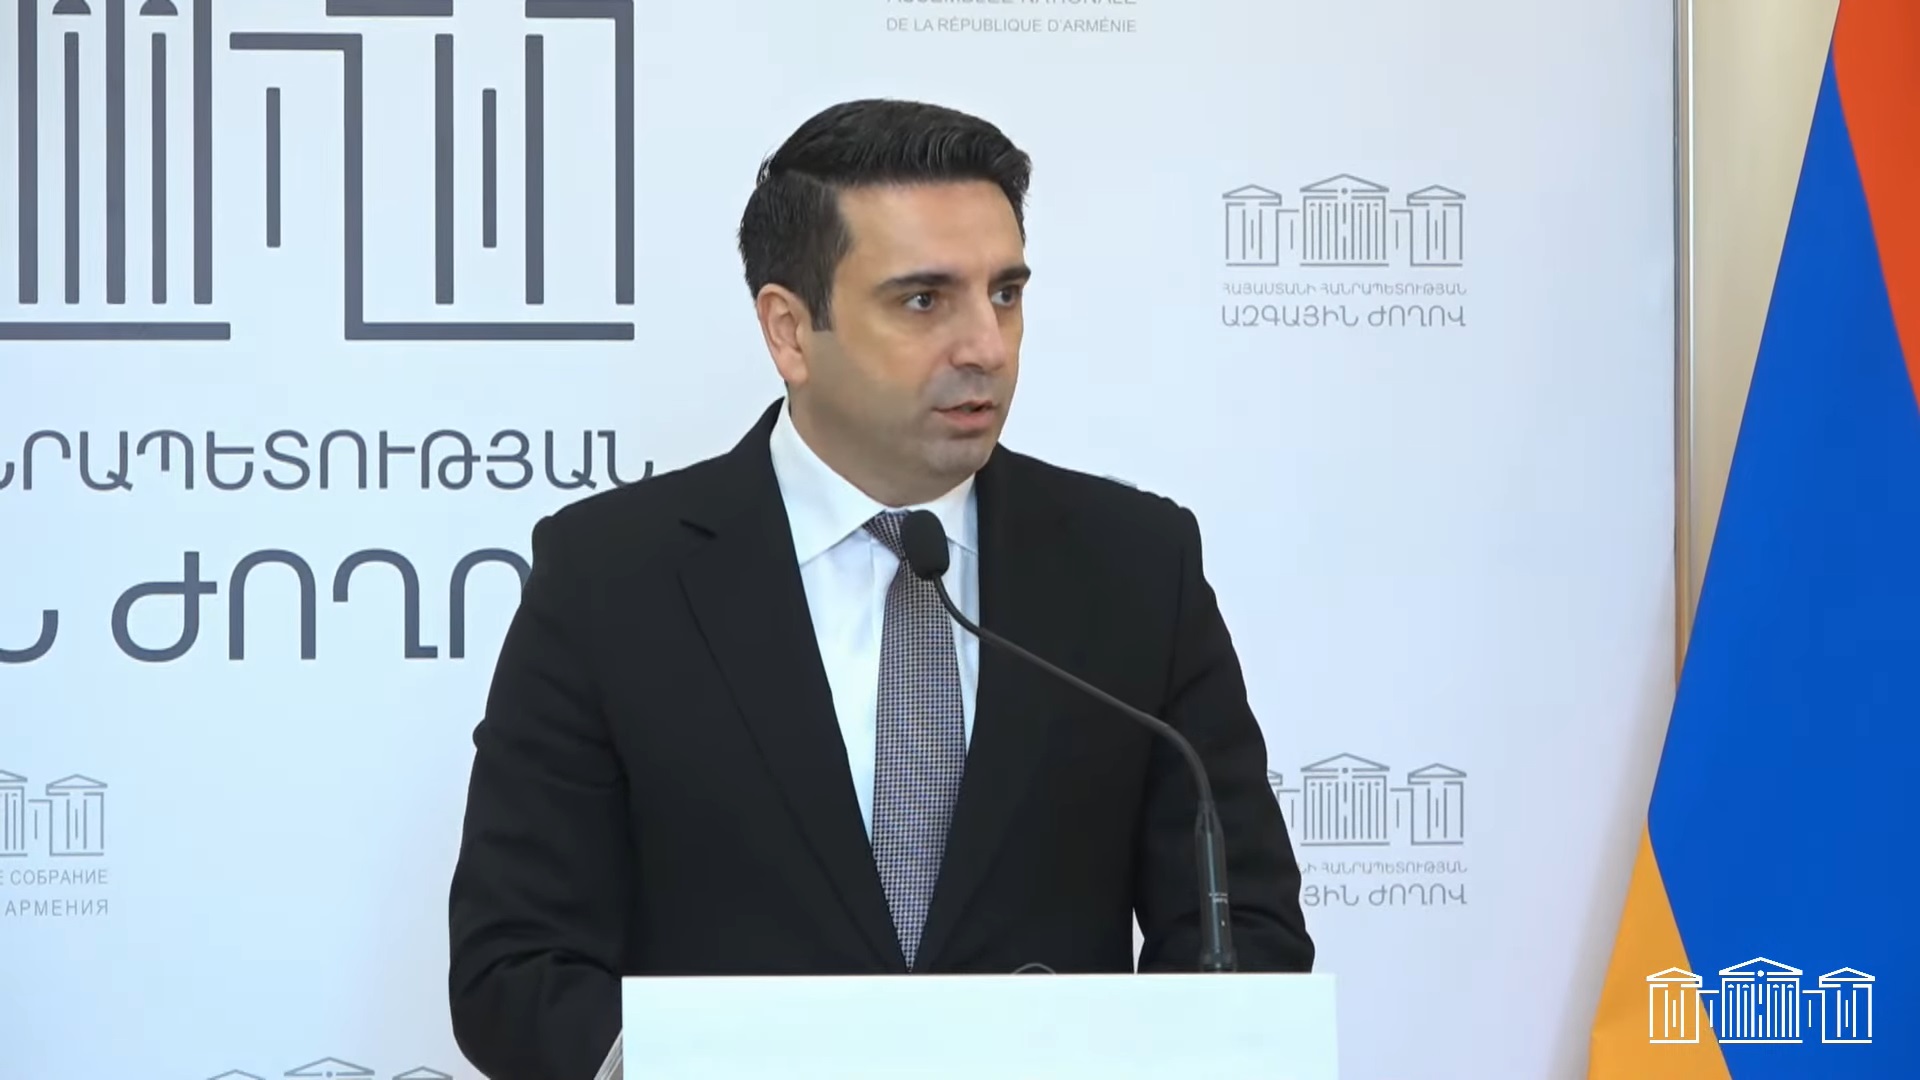 There are also clauses in Constitution of Azerbaijan, which should be amended in a mirrored way: Alen Simonyan